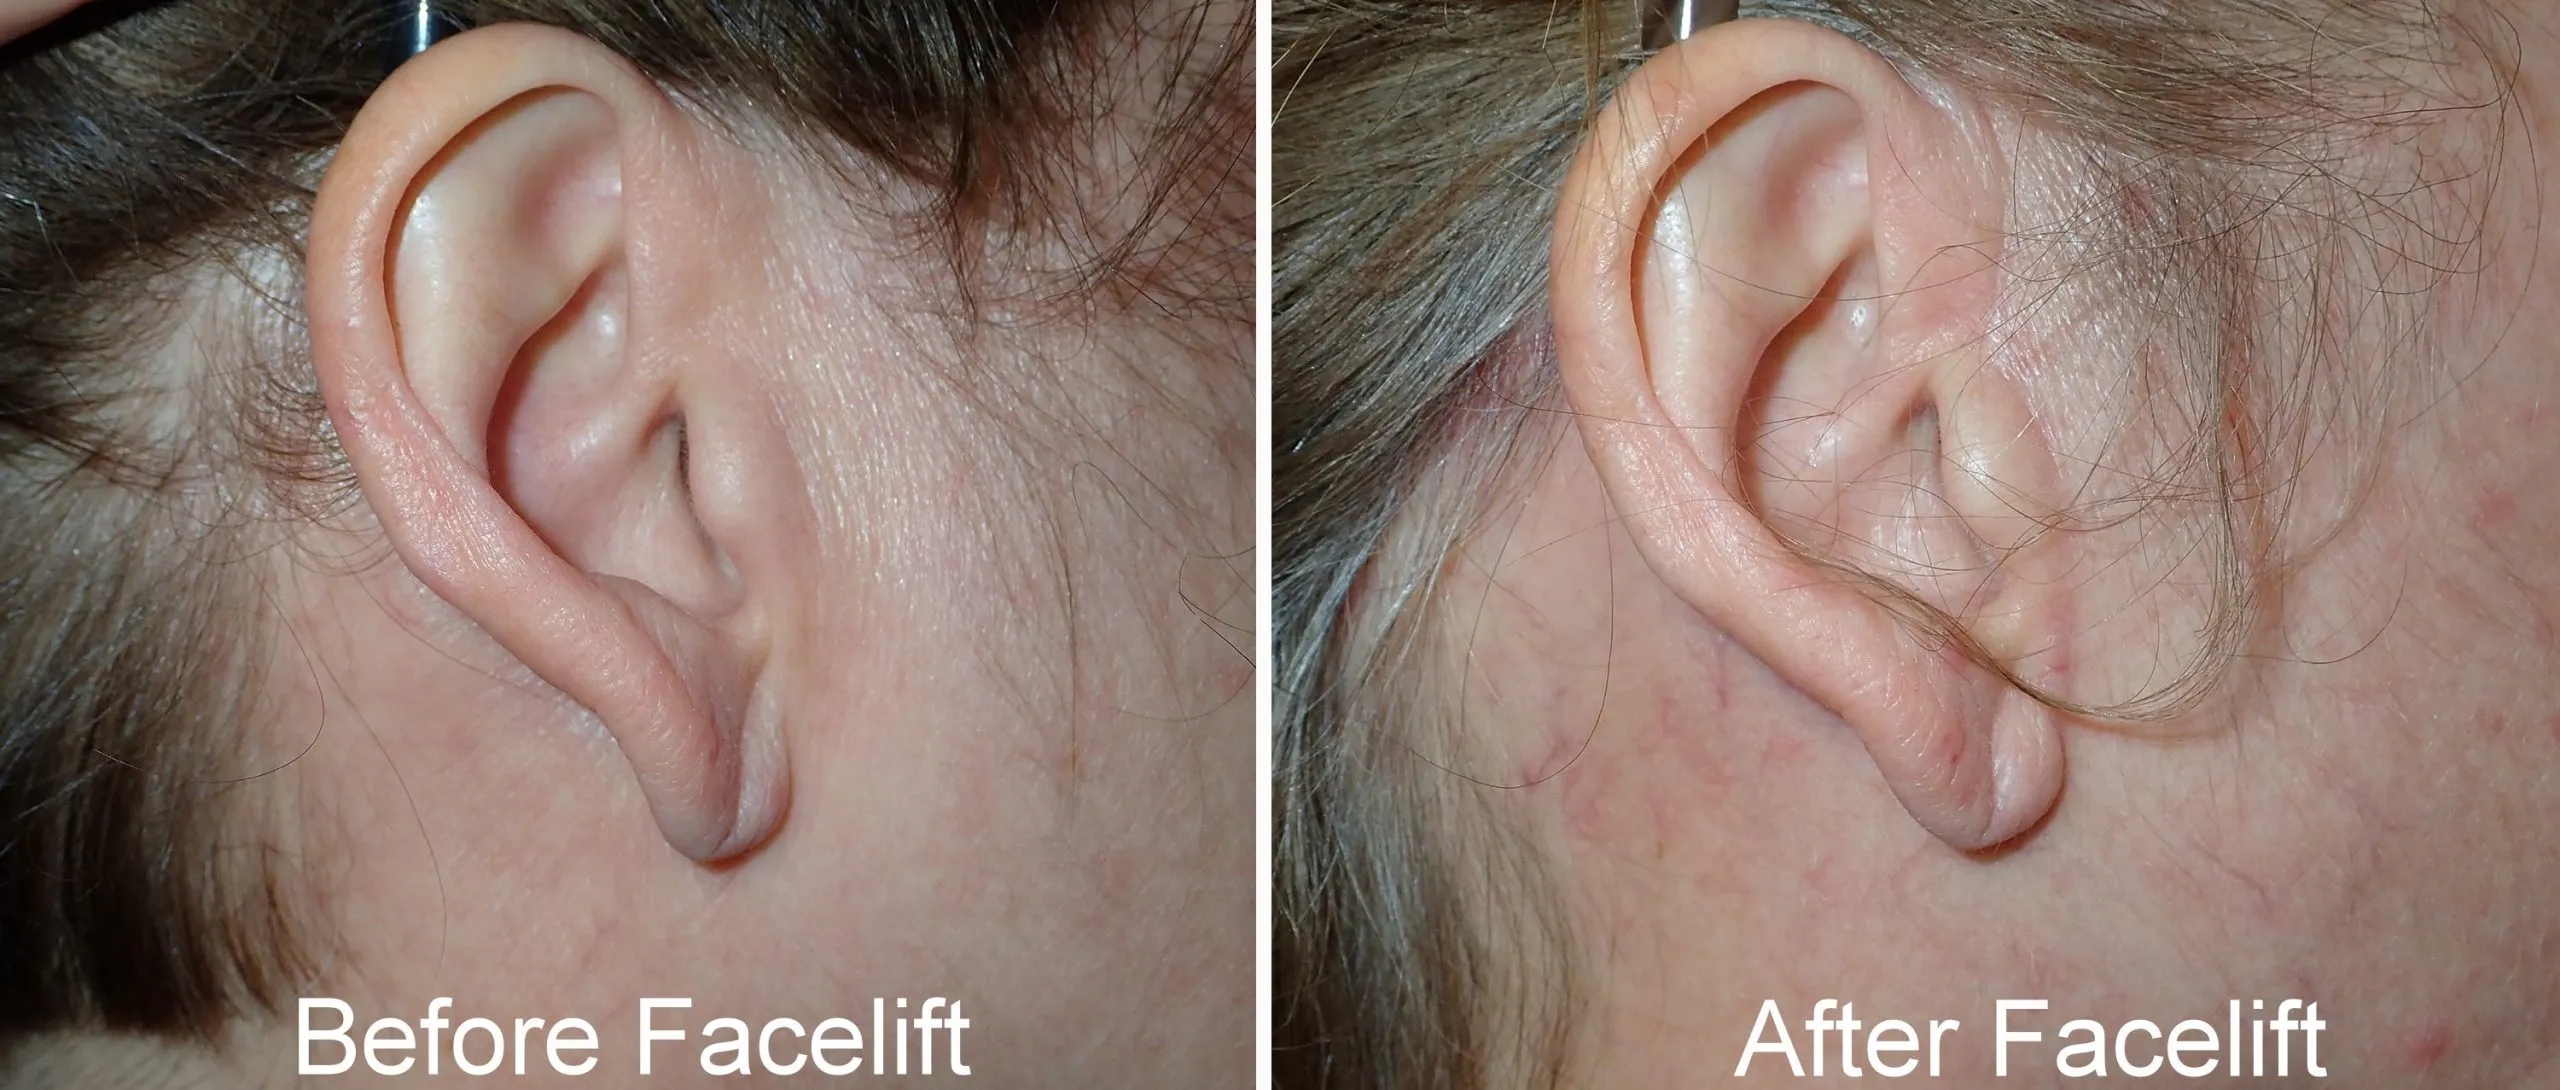 before and after pictures of typical facelift incisions performed by Dr. Niamtu